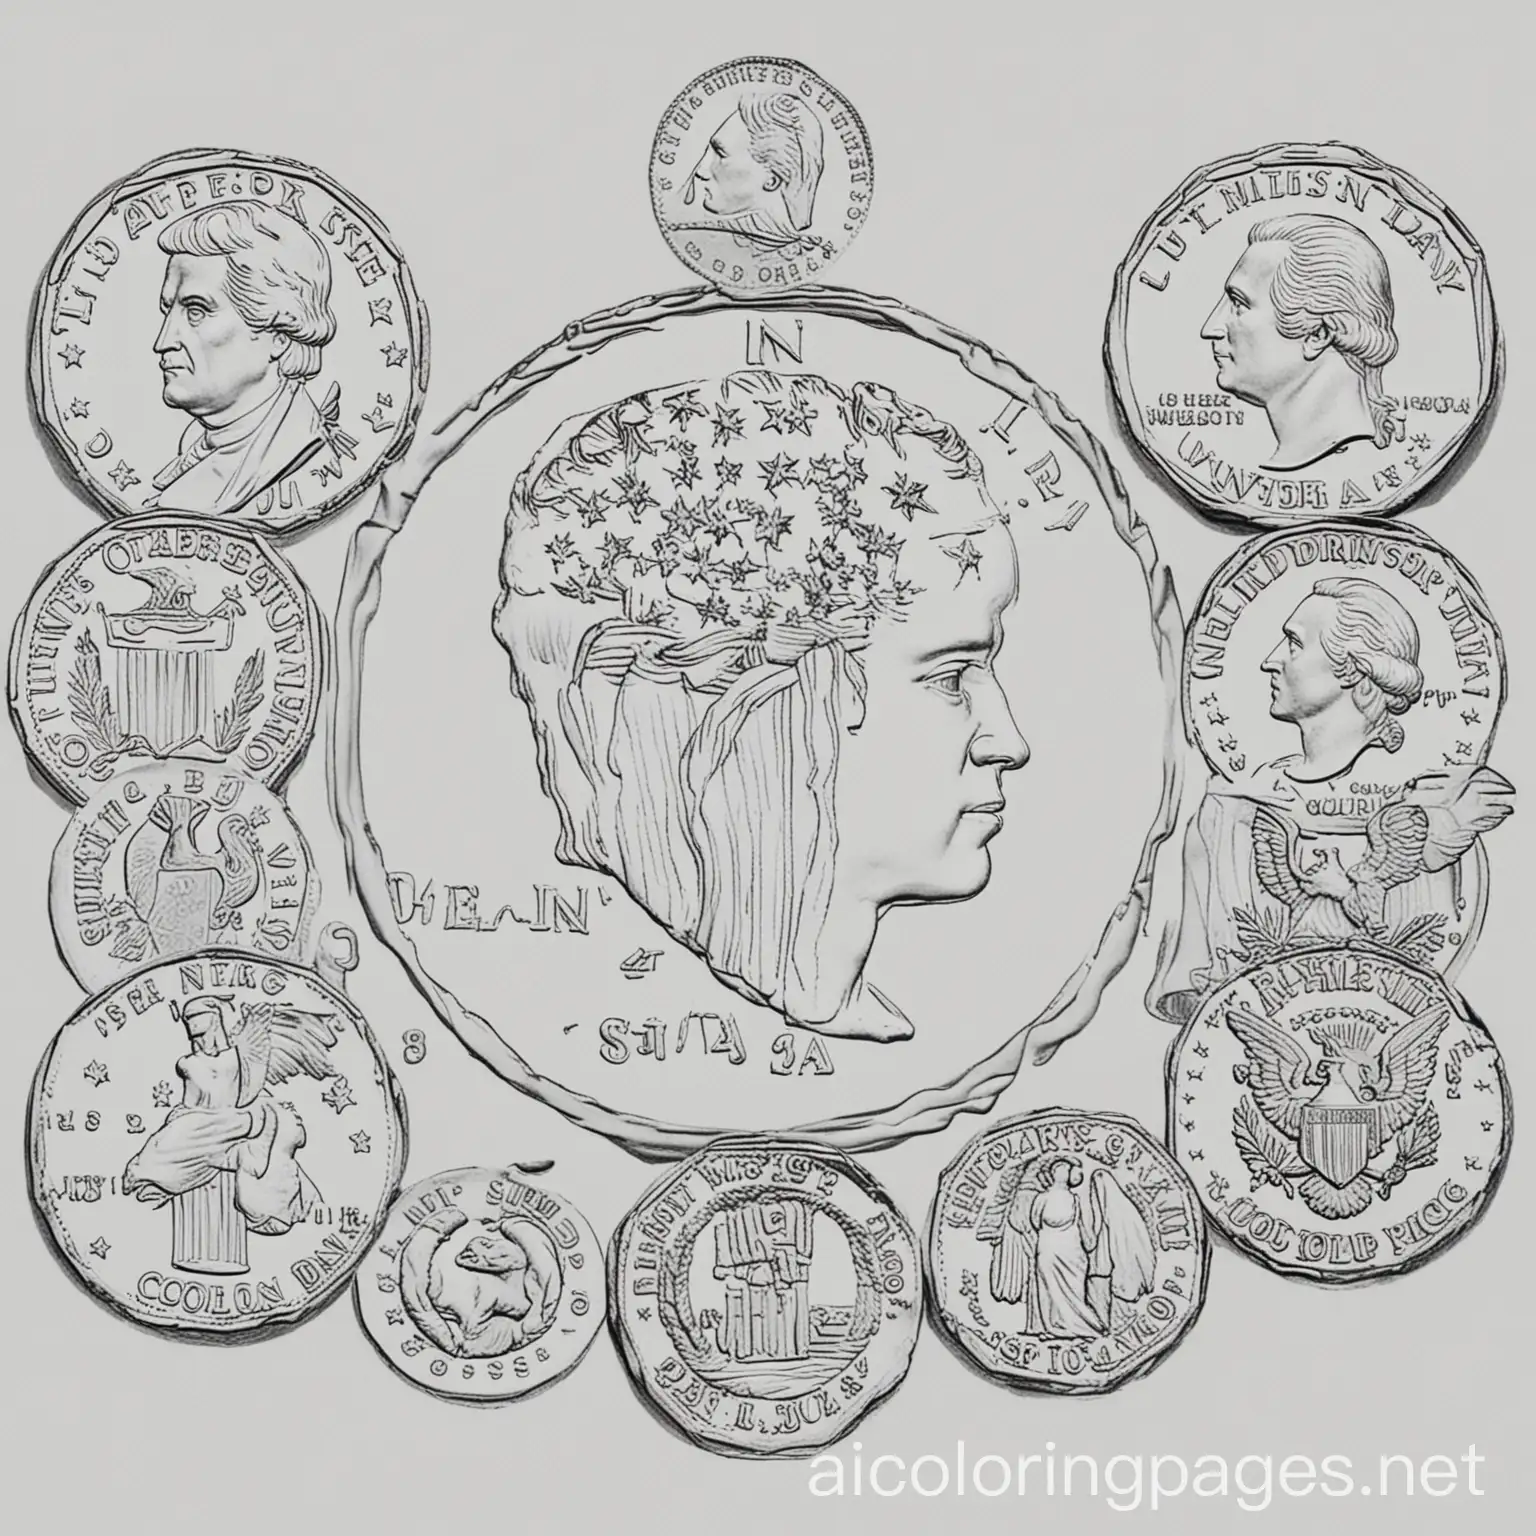 All U.S.A coins coloring with clear image to color, Coloring Page, black and white, line art, white background, Simplicity, Ample White Space. The background of the coloring page is plain white to make it easy for young children to color within the lines. The outlines of all the subjects are easy to distinguish, making it simple for kids to color without too much difficulty